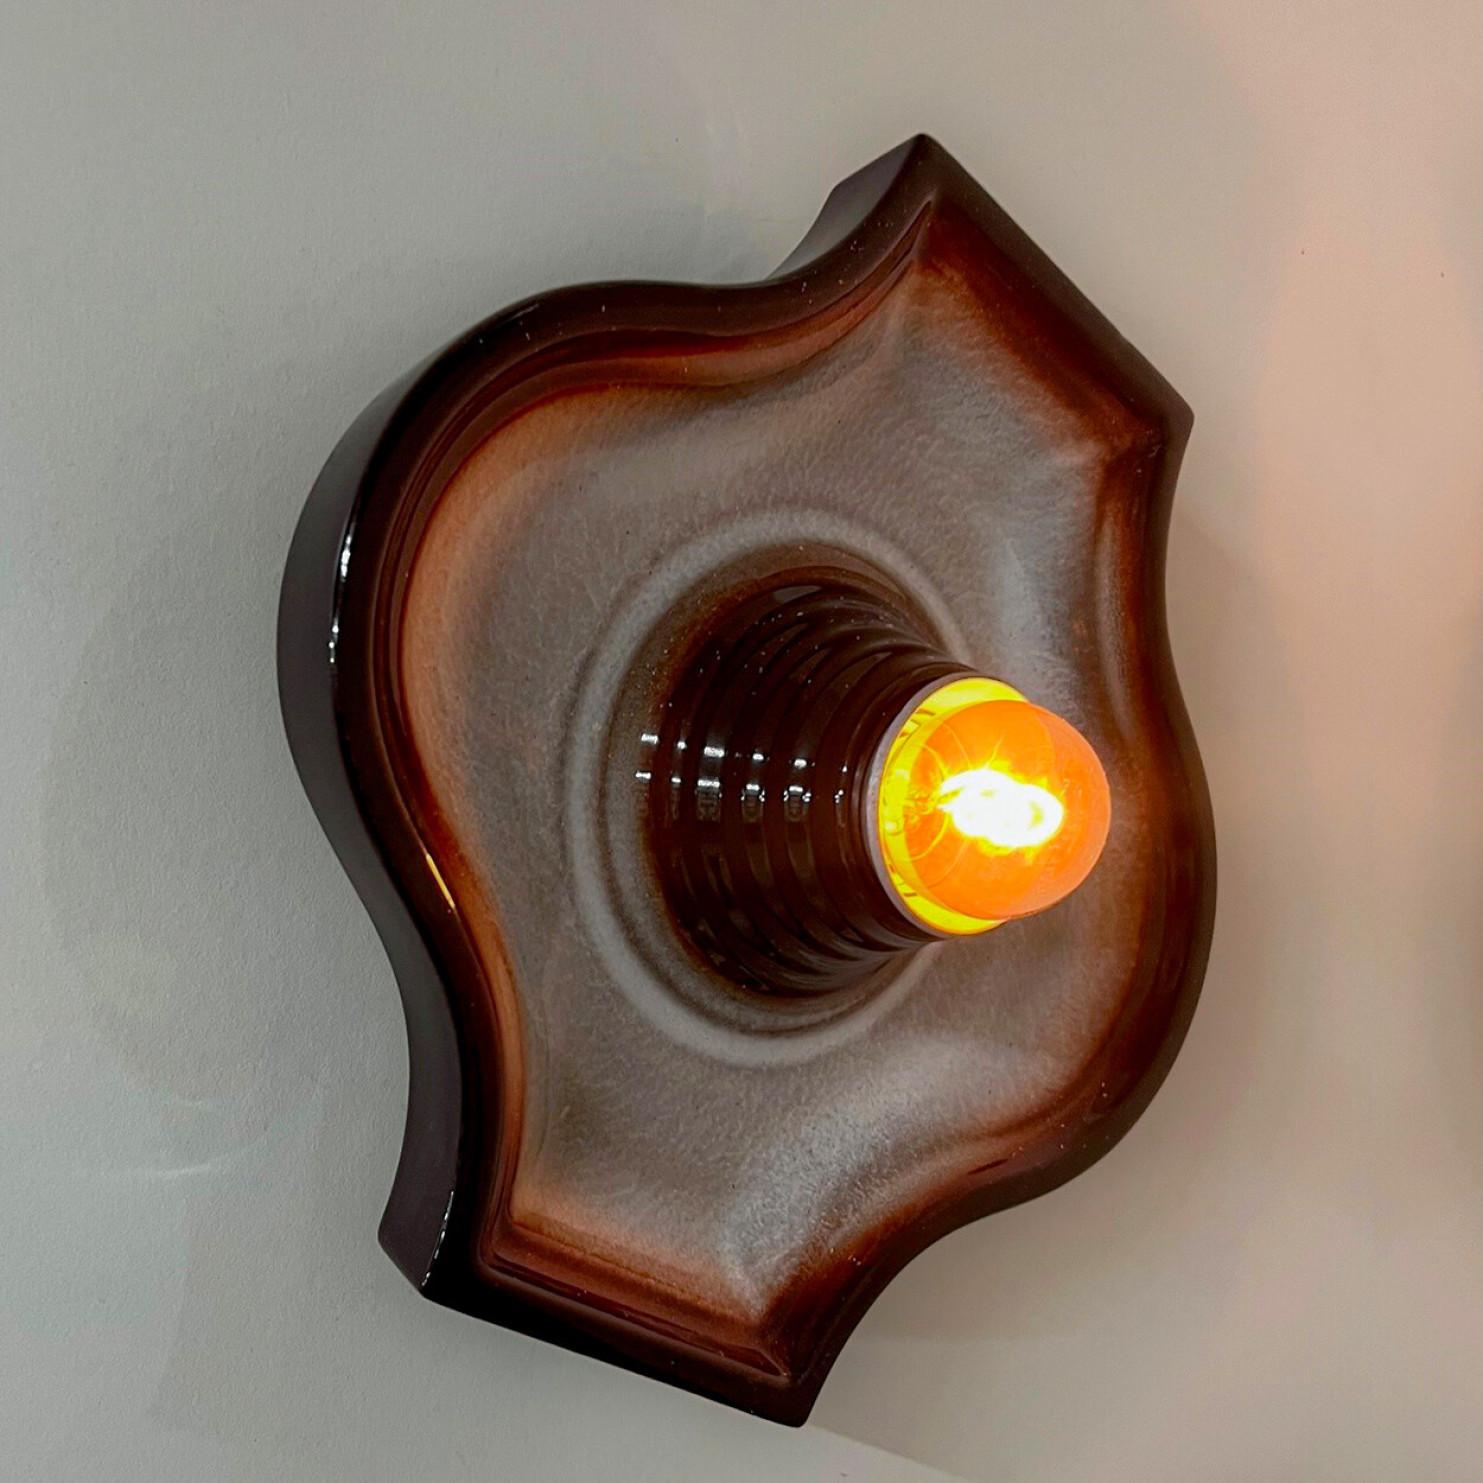 Glazed 1 of 2 Oval Grey Brown Ceramic Wall Lights by Hustadt Keramik, Germany, 1970 For Sale